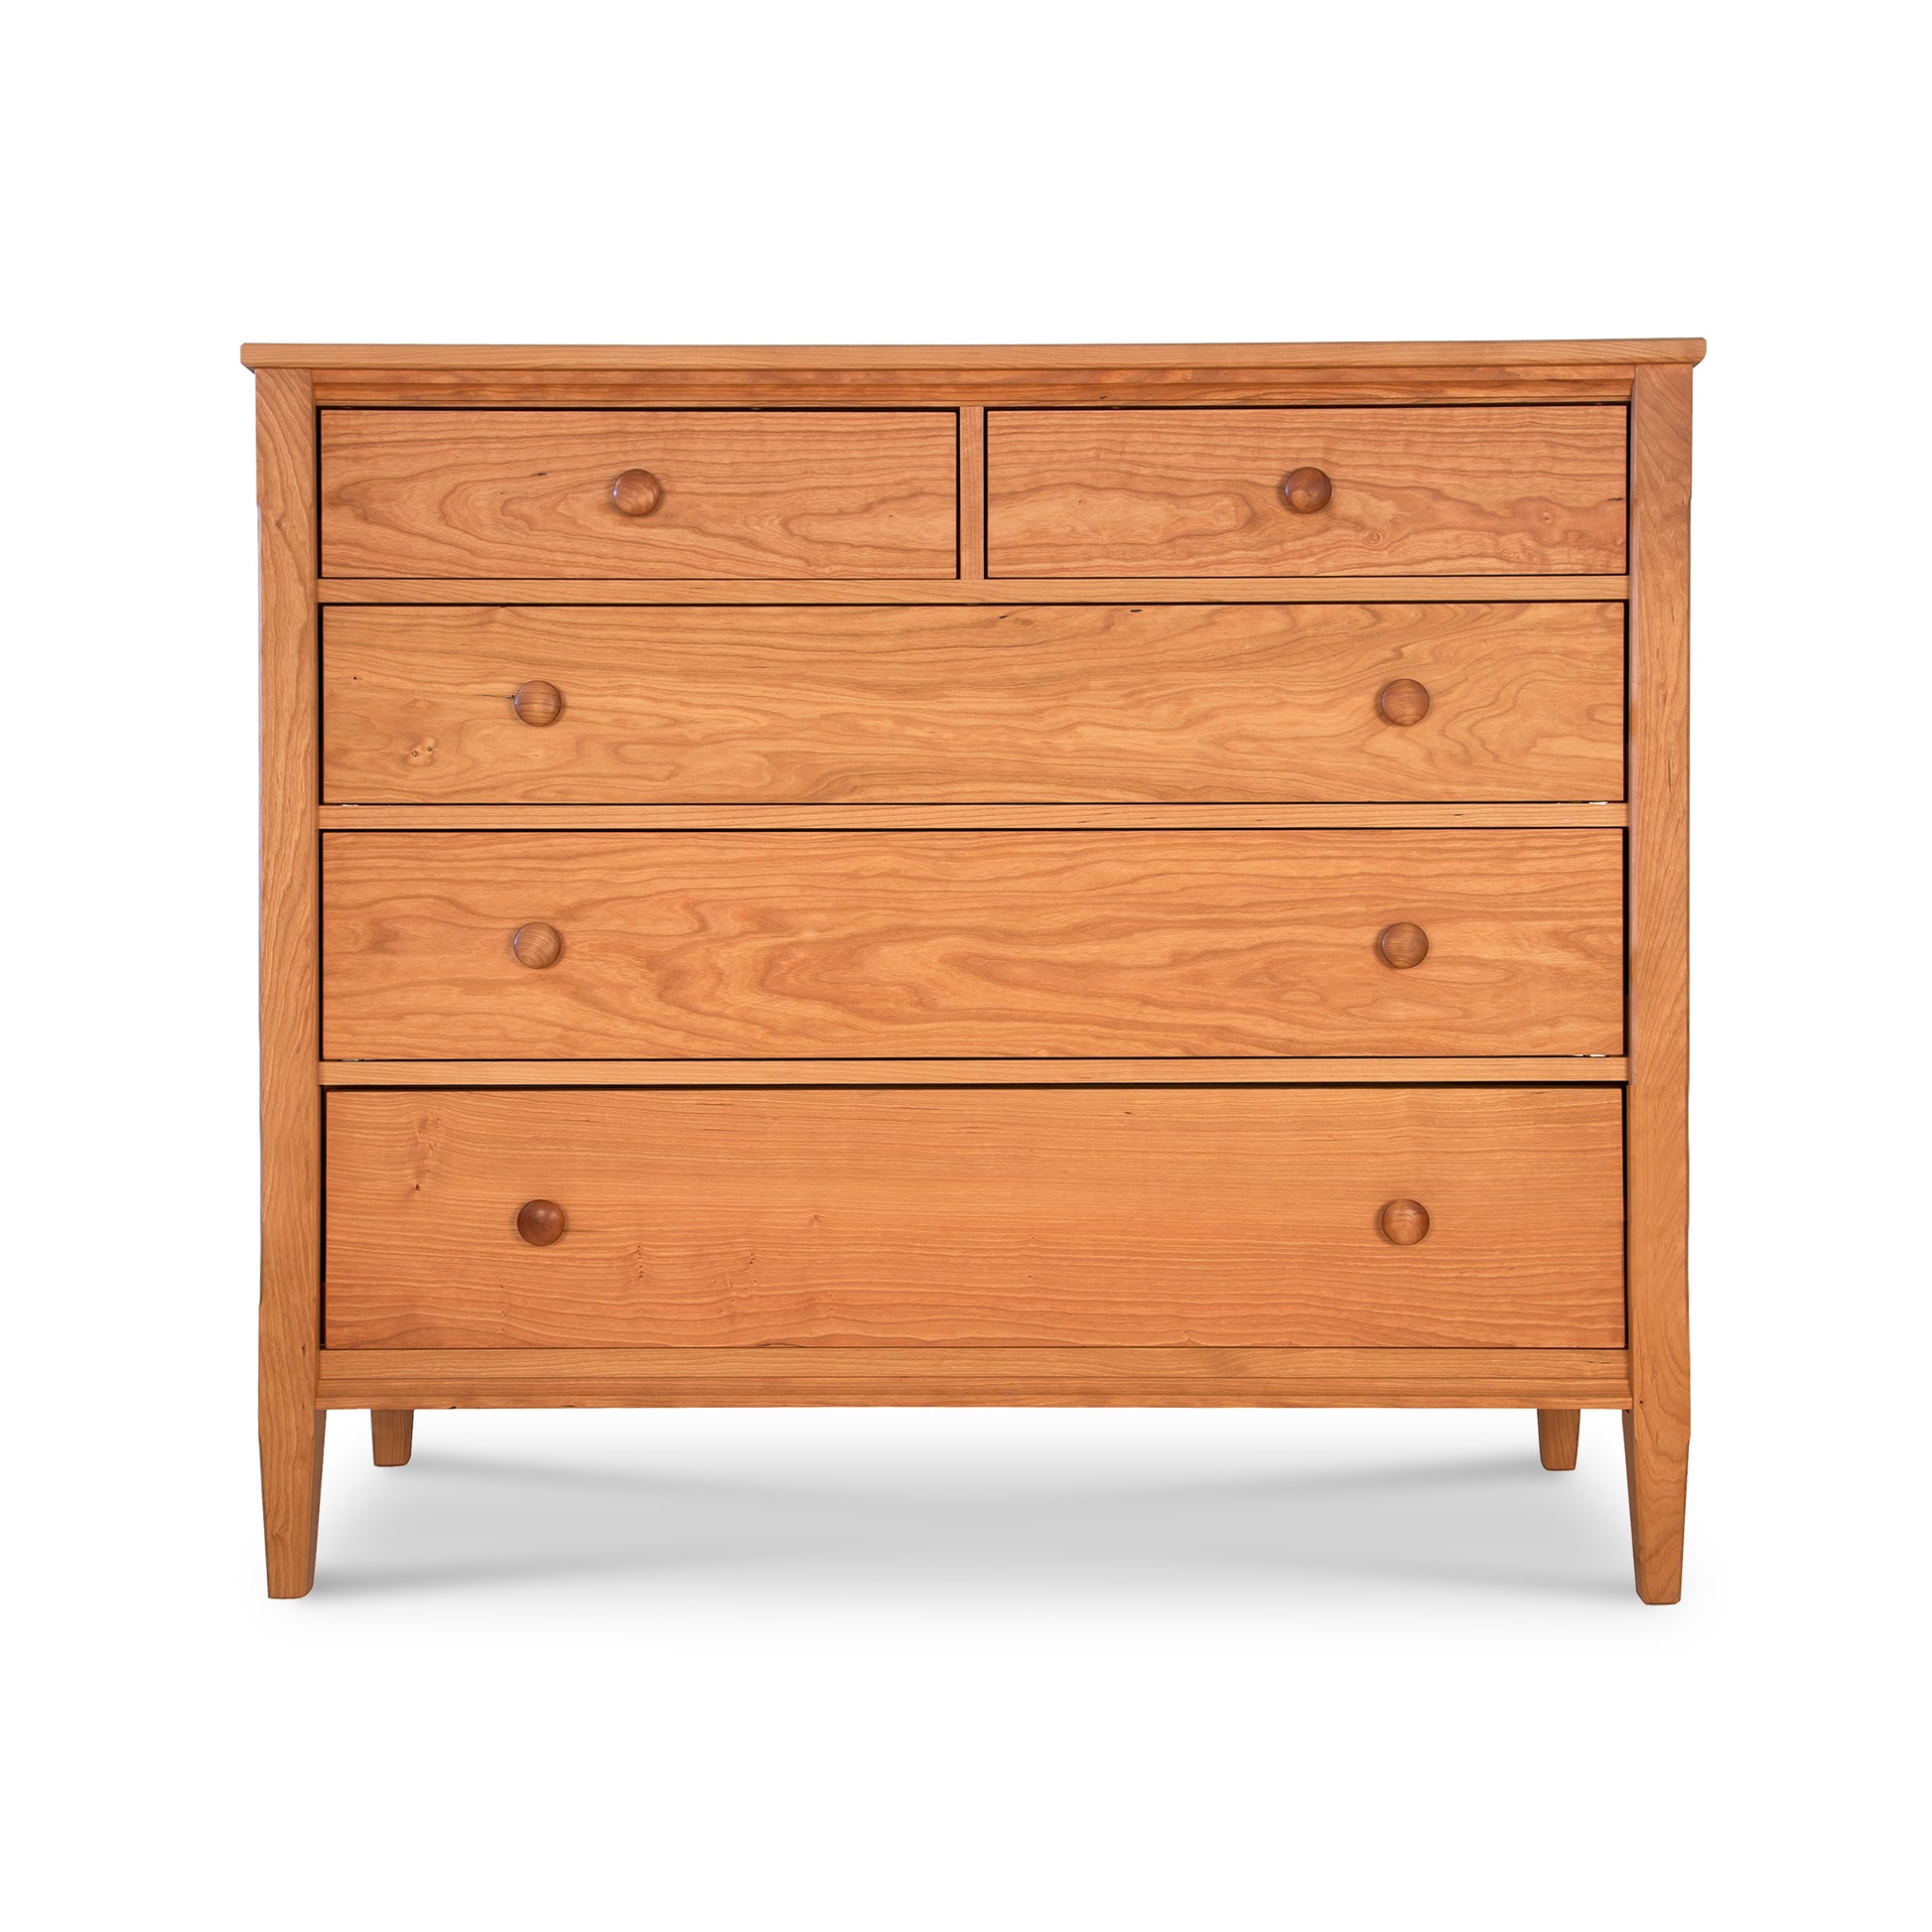 A Vermont Shaker Extra Wide Chest, made by Maple Corner Woodworks, standing on a white background.